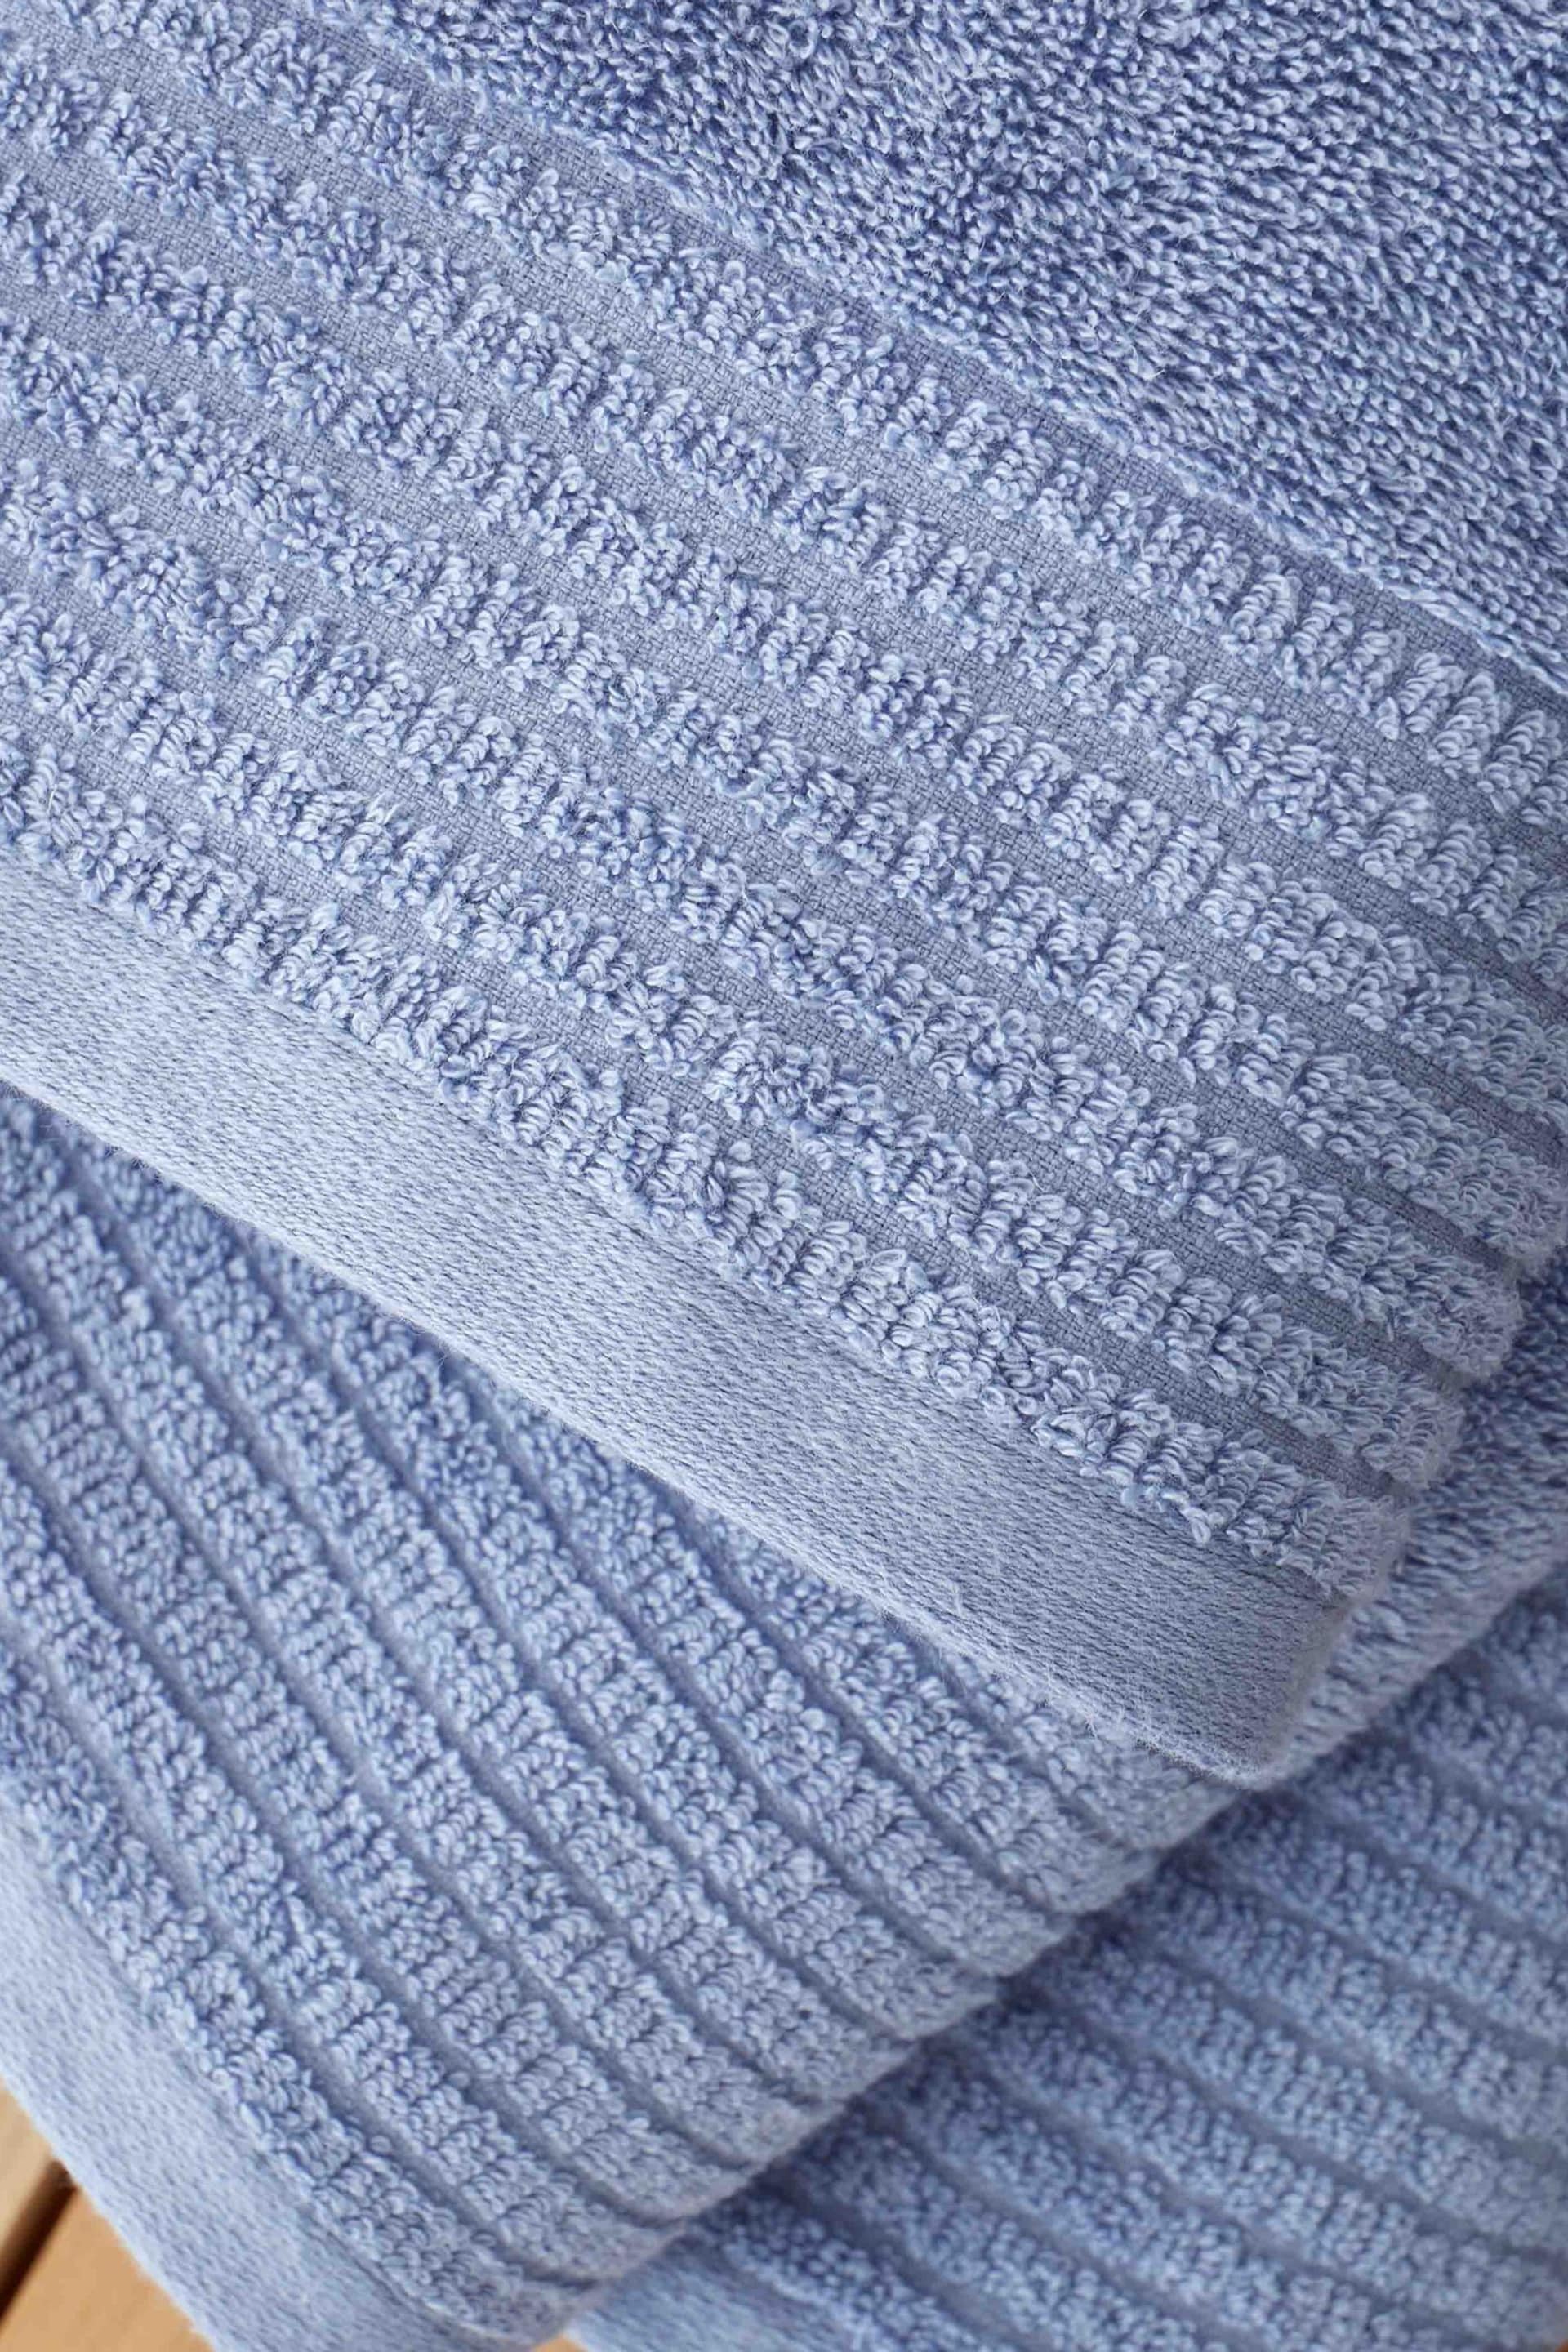 Bianca Blue Egyptian Cotton Towel - Image 4 of 4